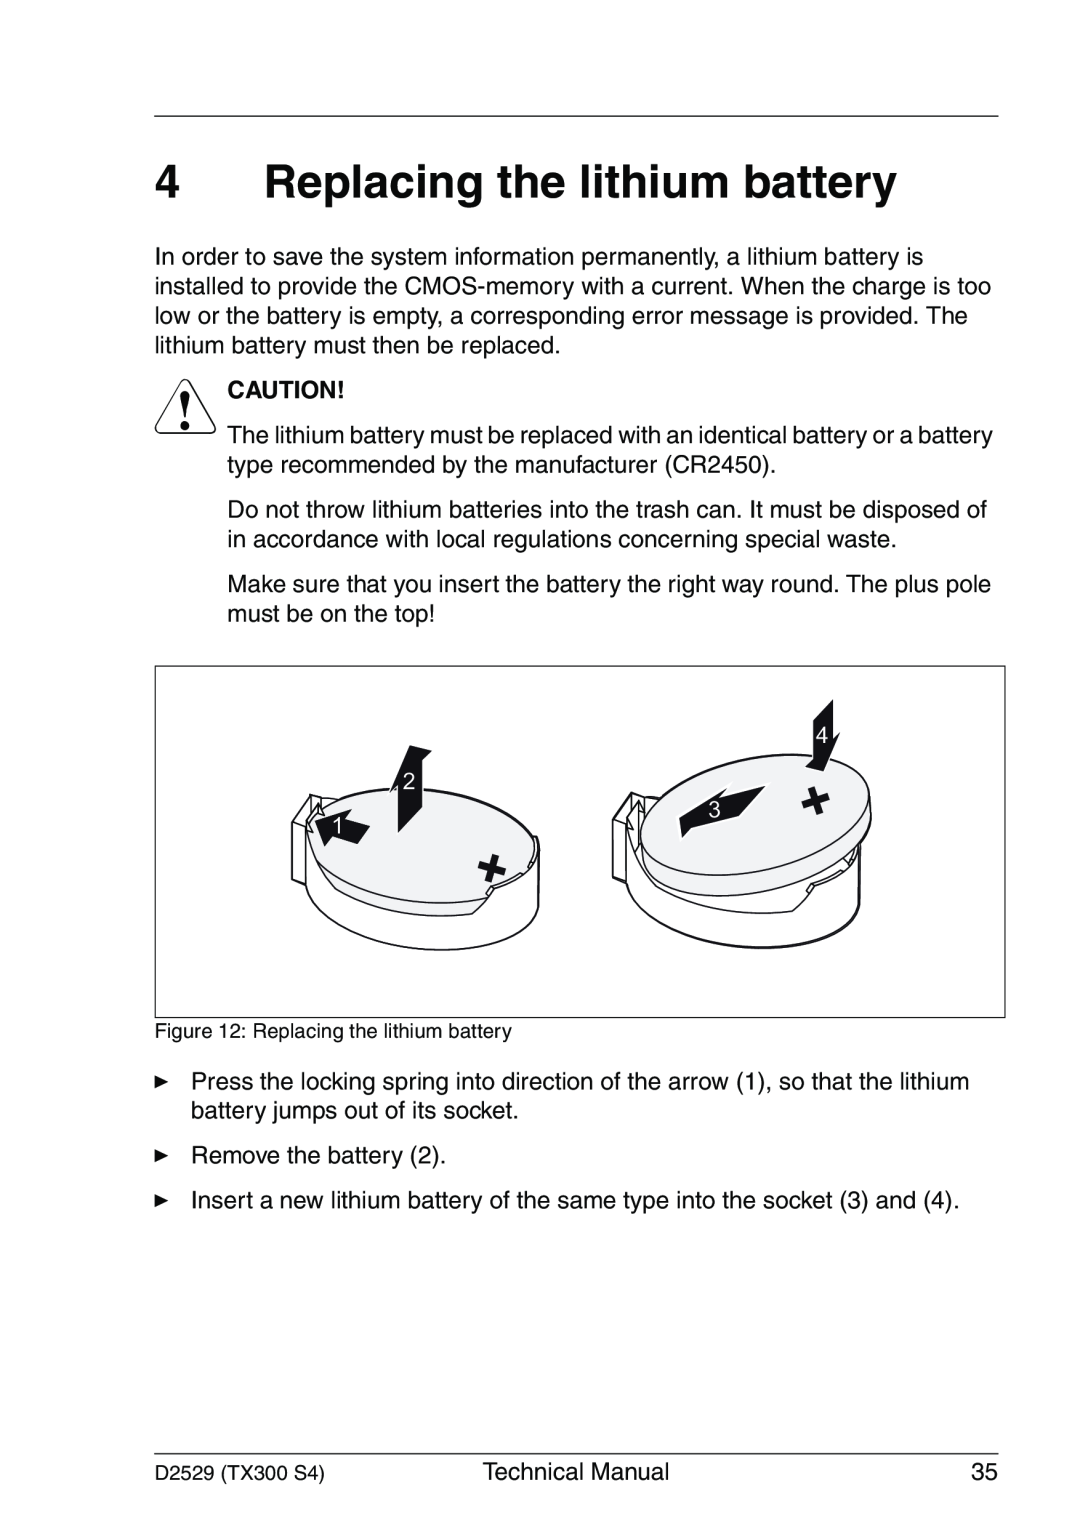 Fujitsu D2529 technical manual Replacing the lithium battery, V Caution 